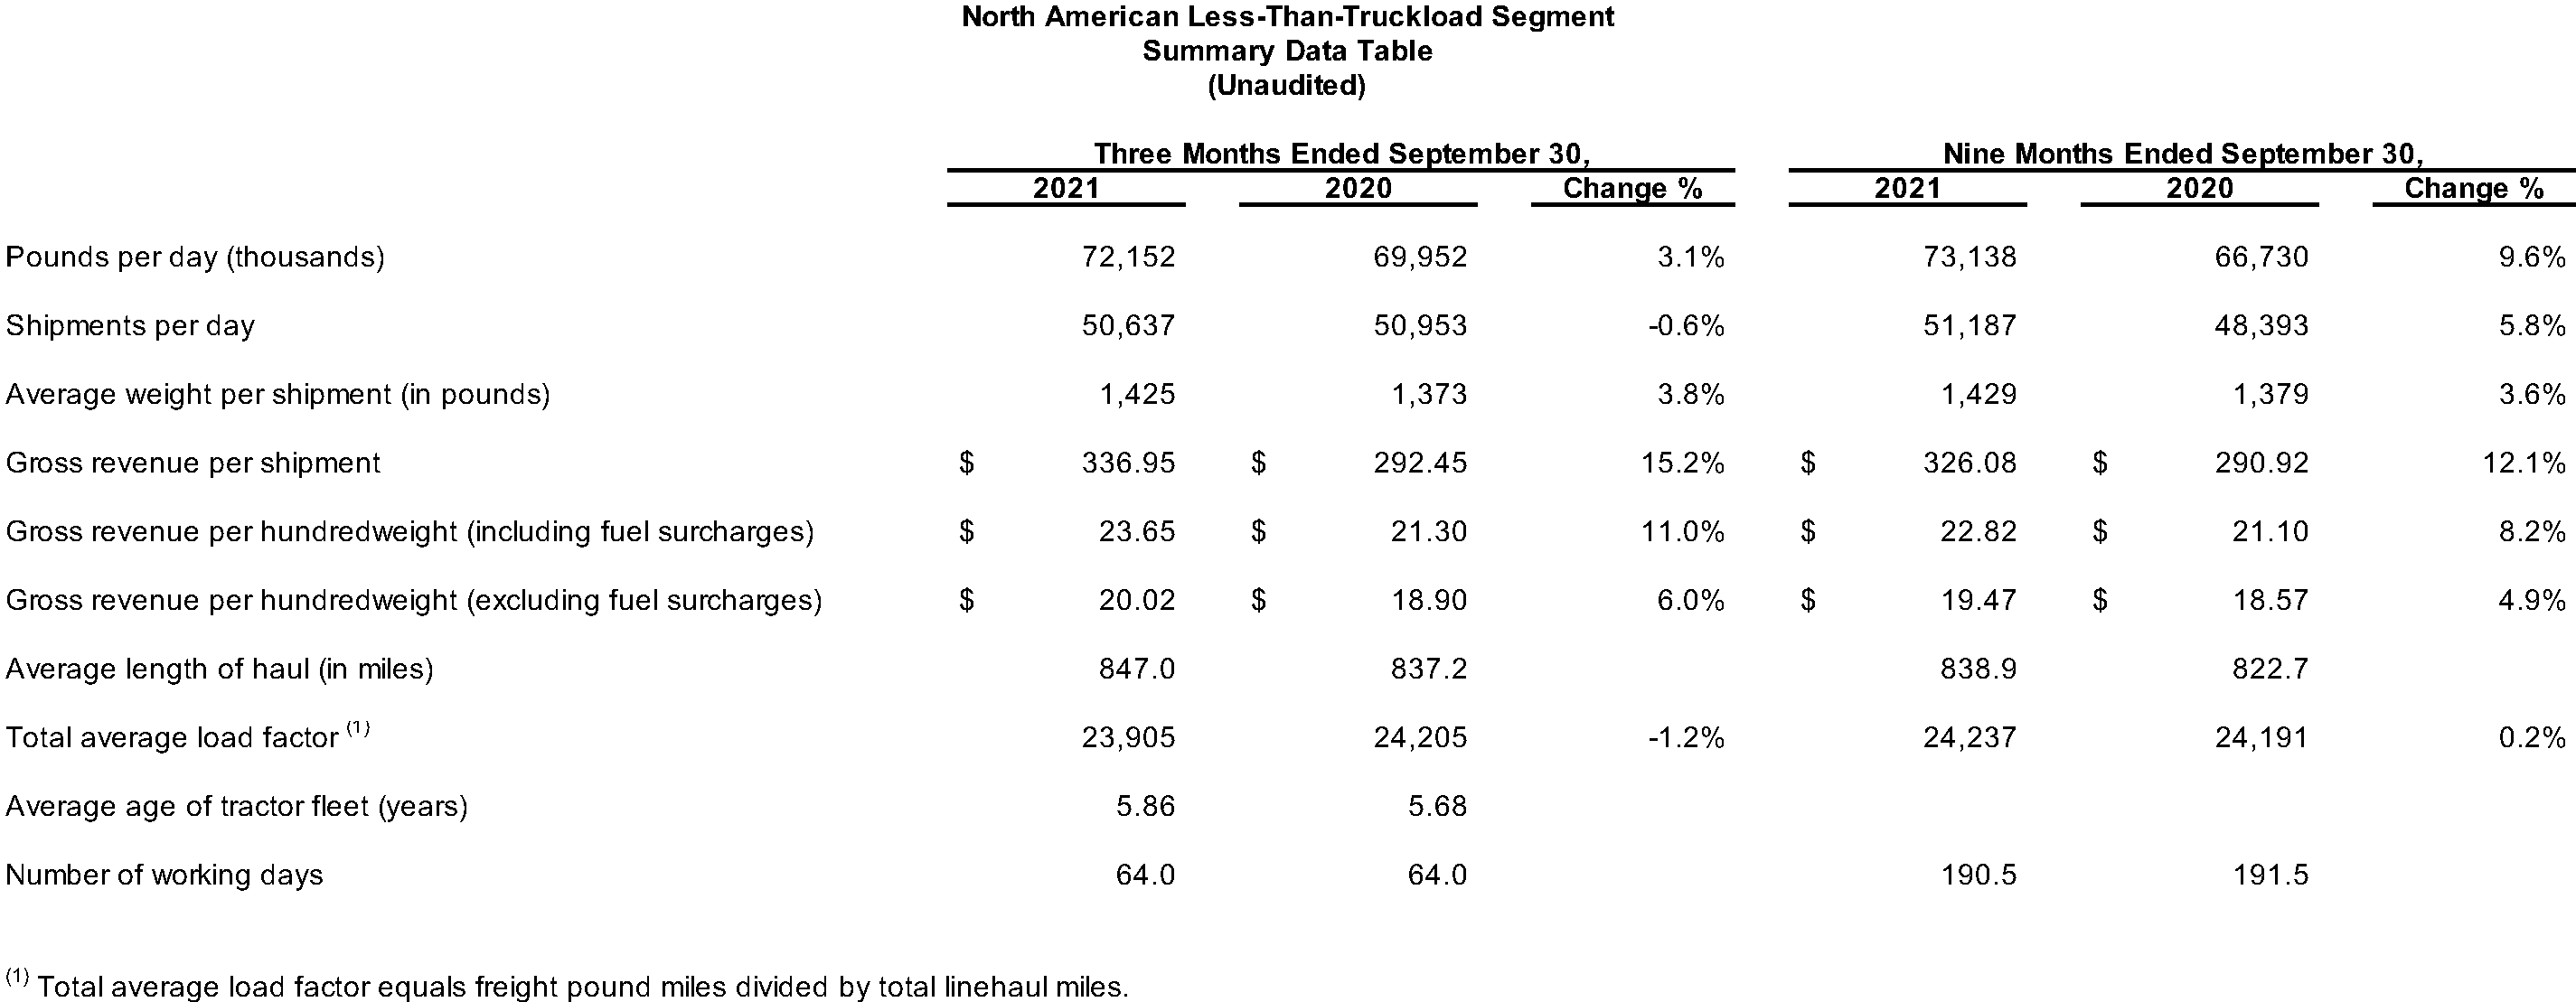 North American Less-Than-Truckload Segment Summary Data Table (Unaudited)